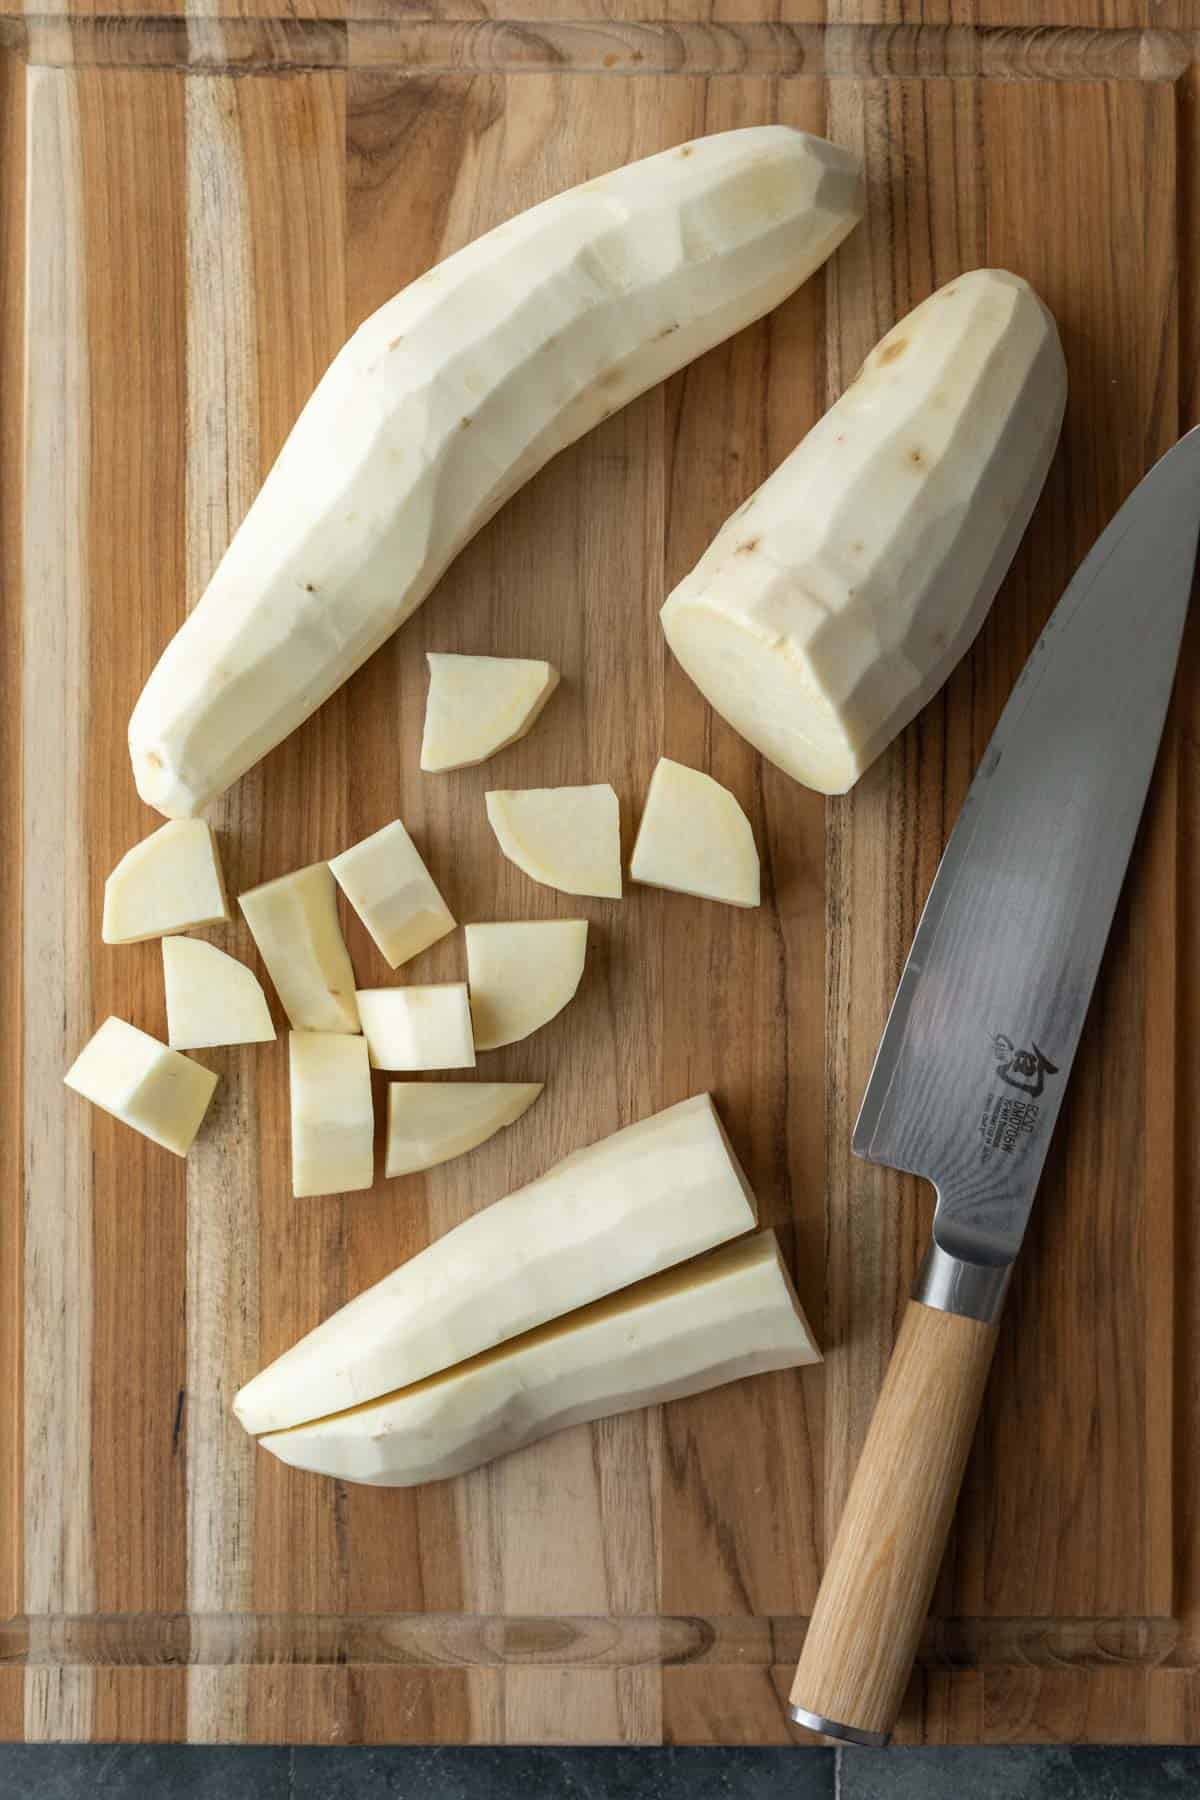 Showing how to easily peel and cut white sweet potatoes.